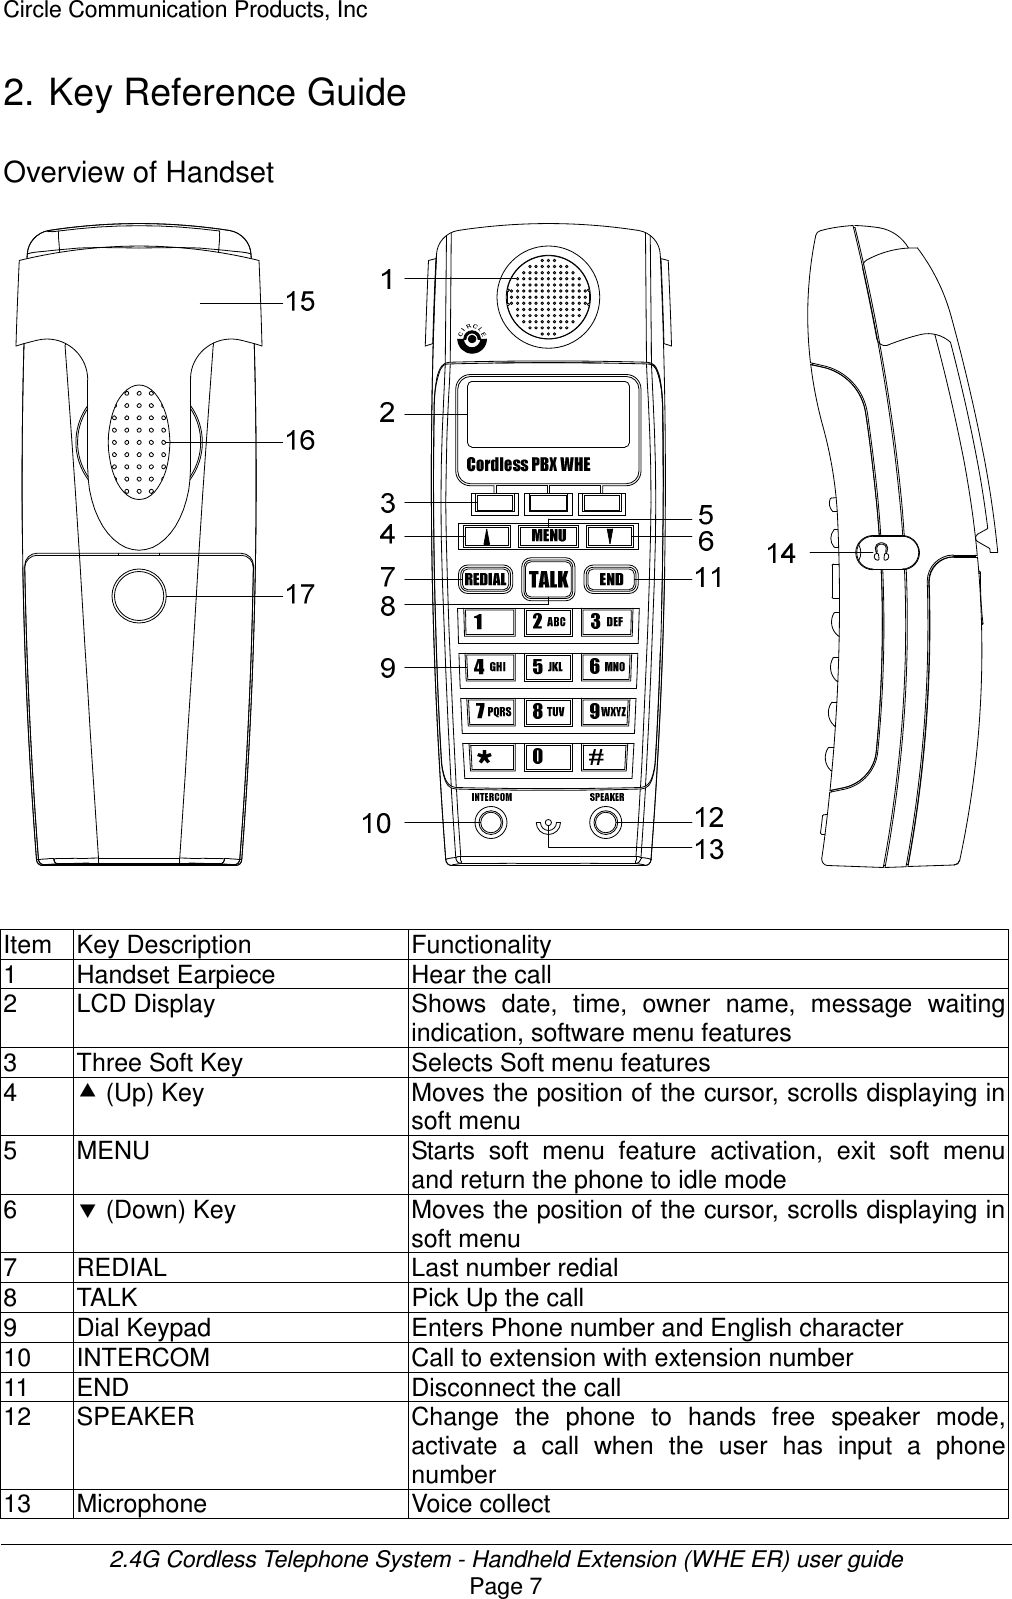 Circle Communication Products, Inc  2.4G Cordless Telephone System - Handheld Extension (WHE ER) user guide Page 7 2. Key Reference Guide Overview of Handset                          Item  Key Description  Functionality 1  Handset Earpiece  Hear the call 2  LCD Display  Shows  date,  time,  owner  name,  message  waiting indication, software menu features 3  Three Soft Key  Selects Soft menu features 4   (Up) Key Moves the position of the cursor, scrolls displaying in soft menu 5  MENU Starts  soft  menu  feature  activation,  exit  soft  menu and return the phone to idle mode 6   (Down) Key Moves the position of the cursor, scrolls displaying in soft menu 7  REDIAL  Last number redial 8  TALK  Pick Up the call 9  Dial Keypad  Enters Phone number and English character 10  INTERCOM  Call to extension with extension number 11  END  Disconnect the call 12  SPEAKER Change  the  phone  to  hands  free  speaker  mode, activate  a  call  when  the  user  has  input  a  phone number 13  Microphone  Voice collect 